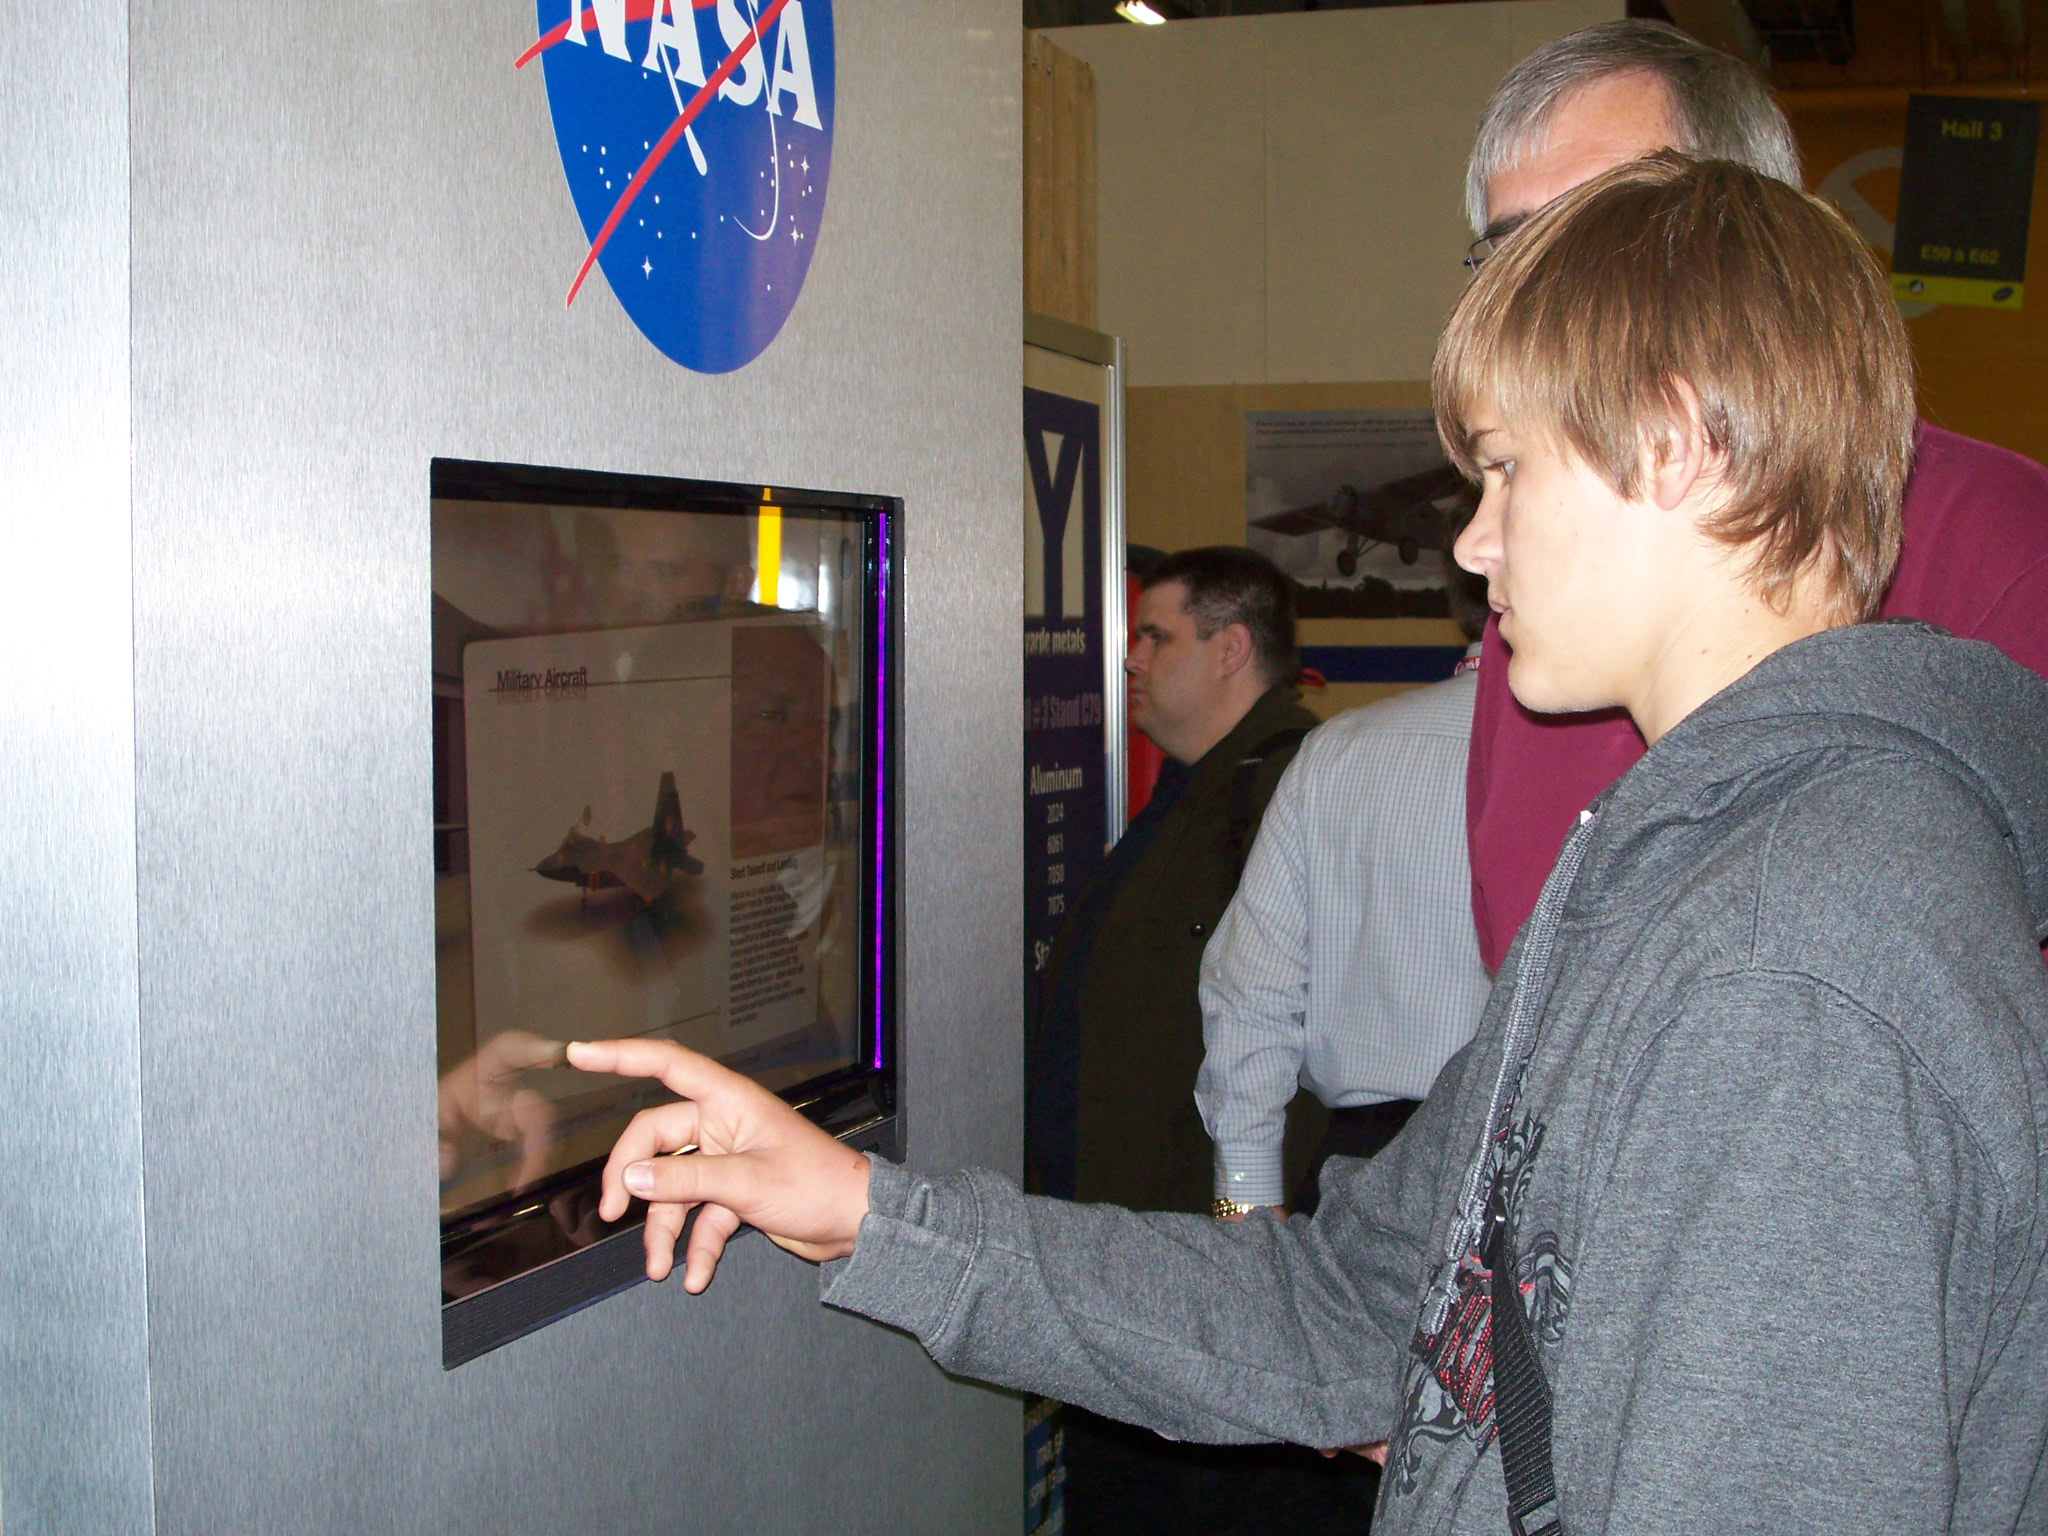 A young person using the touch-screen in the NASA exhibit booth.